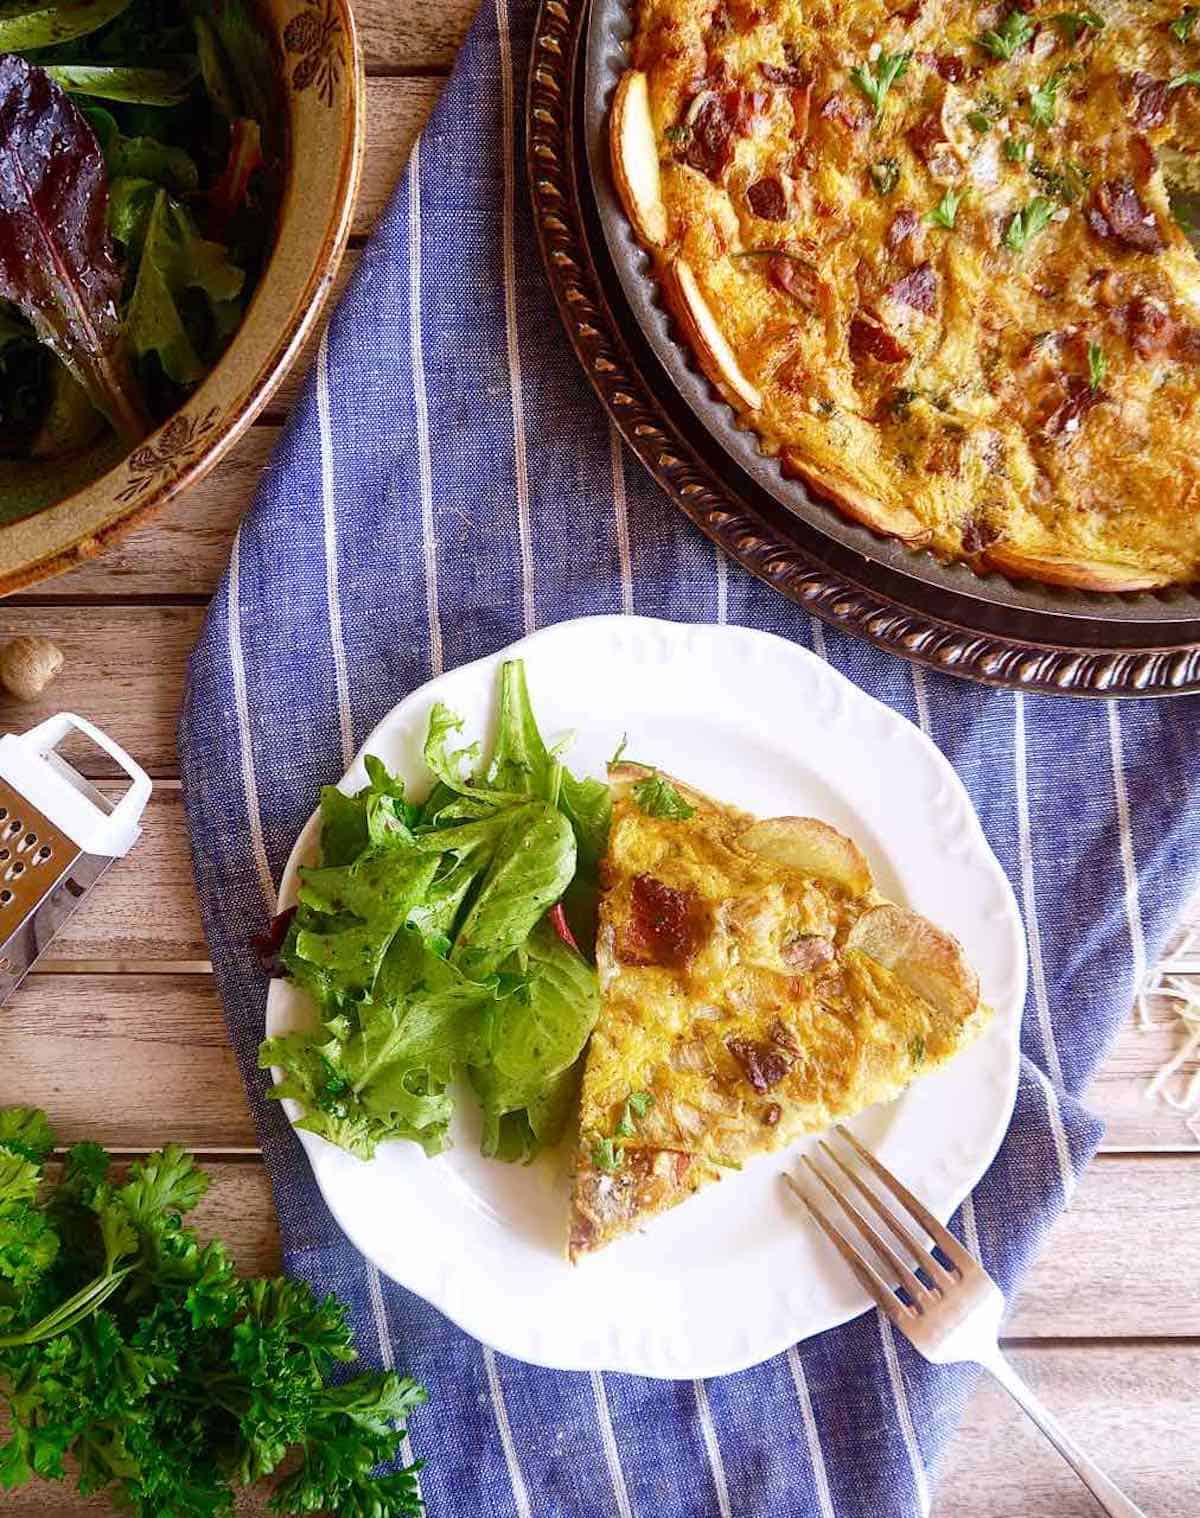 A slice of quiche Lorraine with a side salad on a plate.